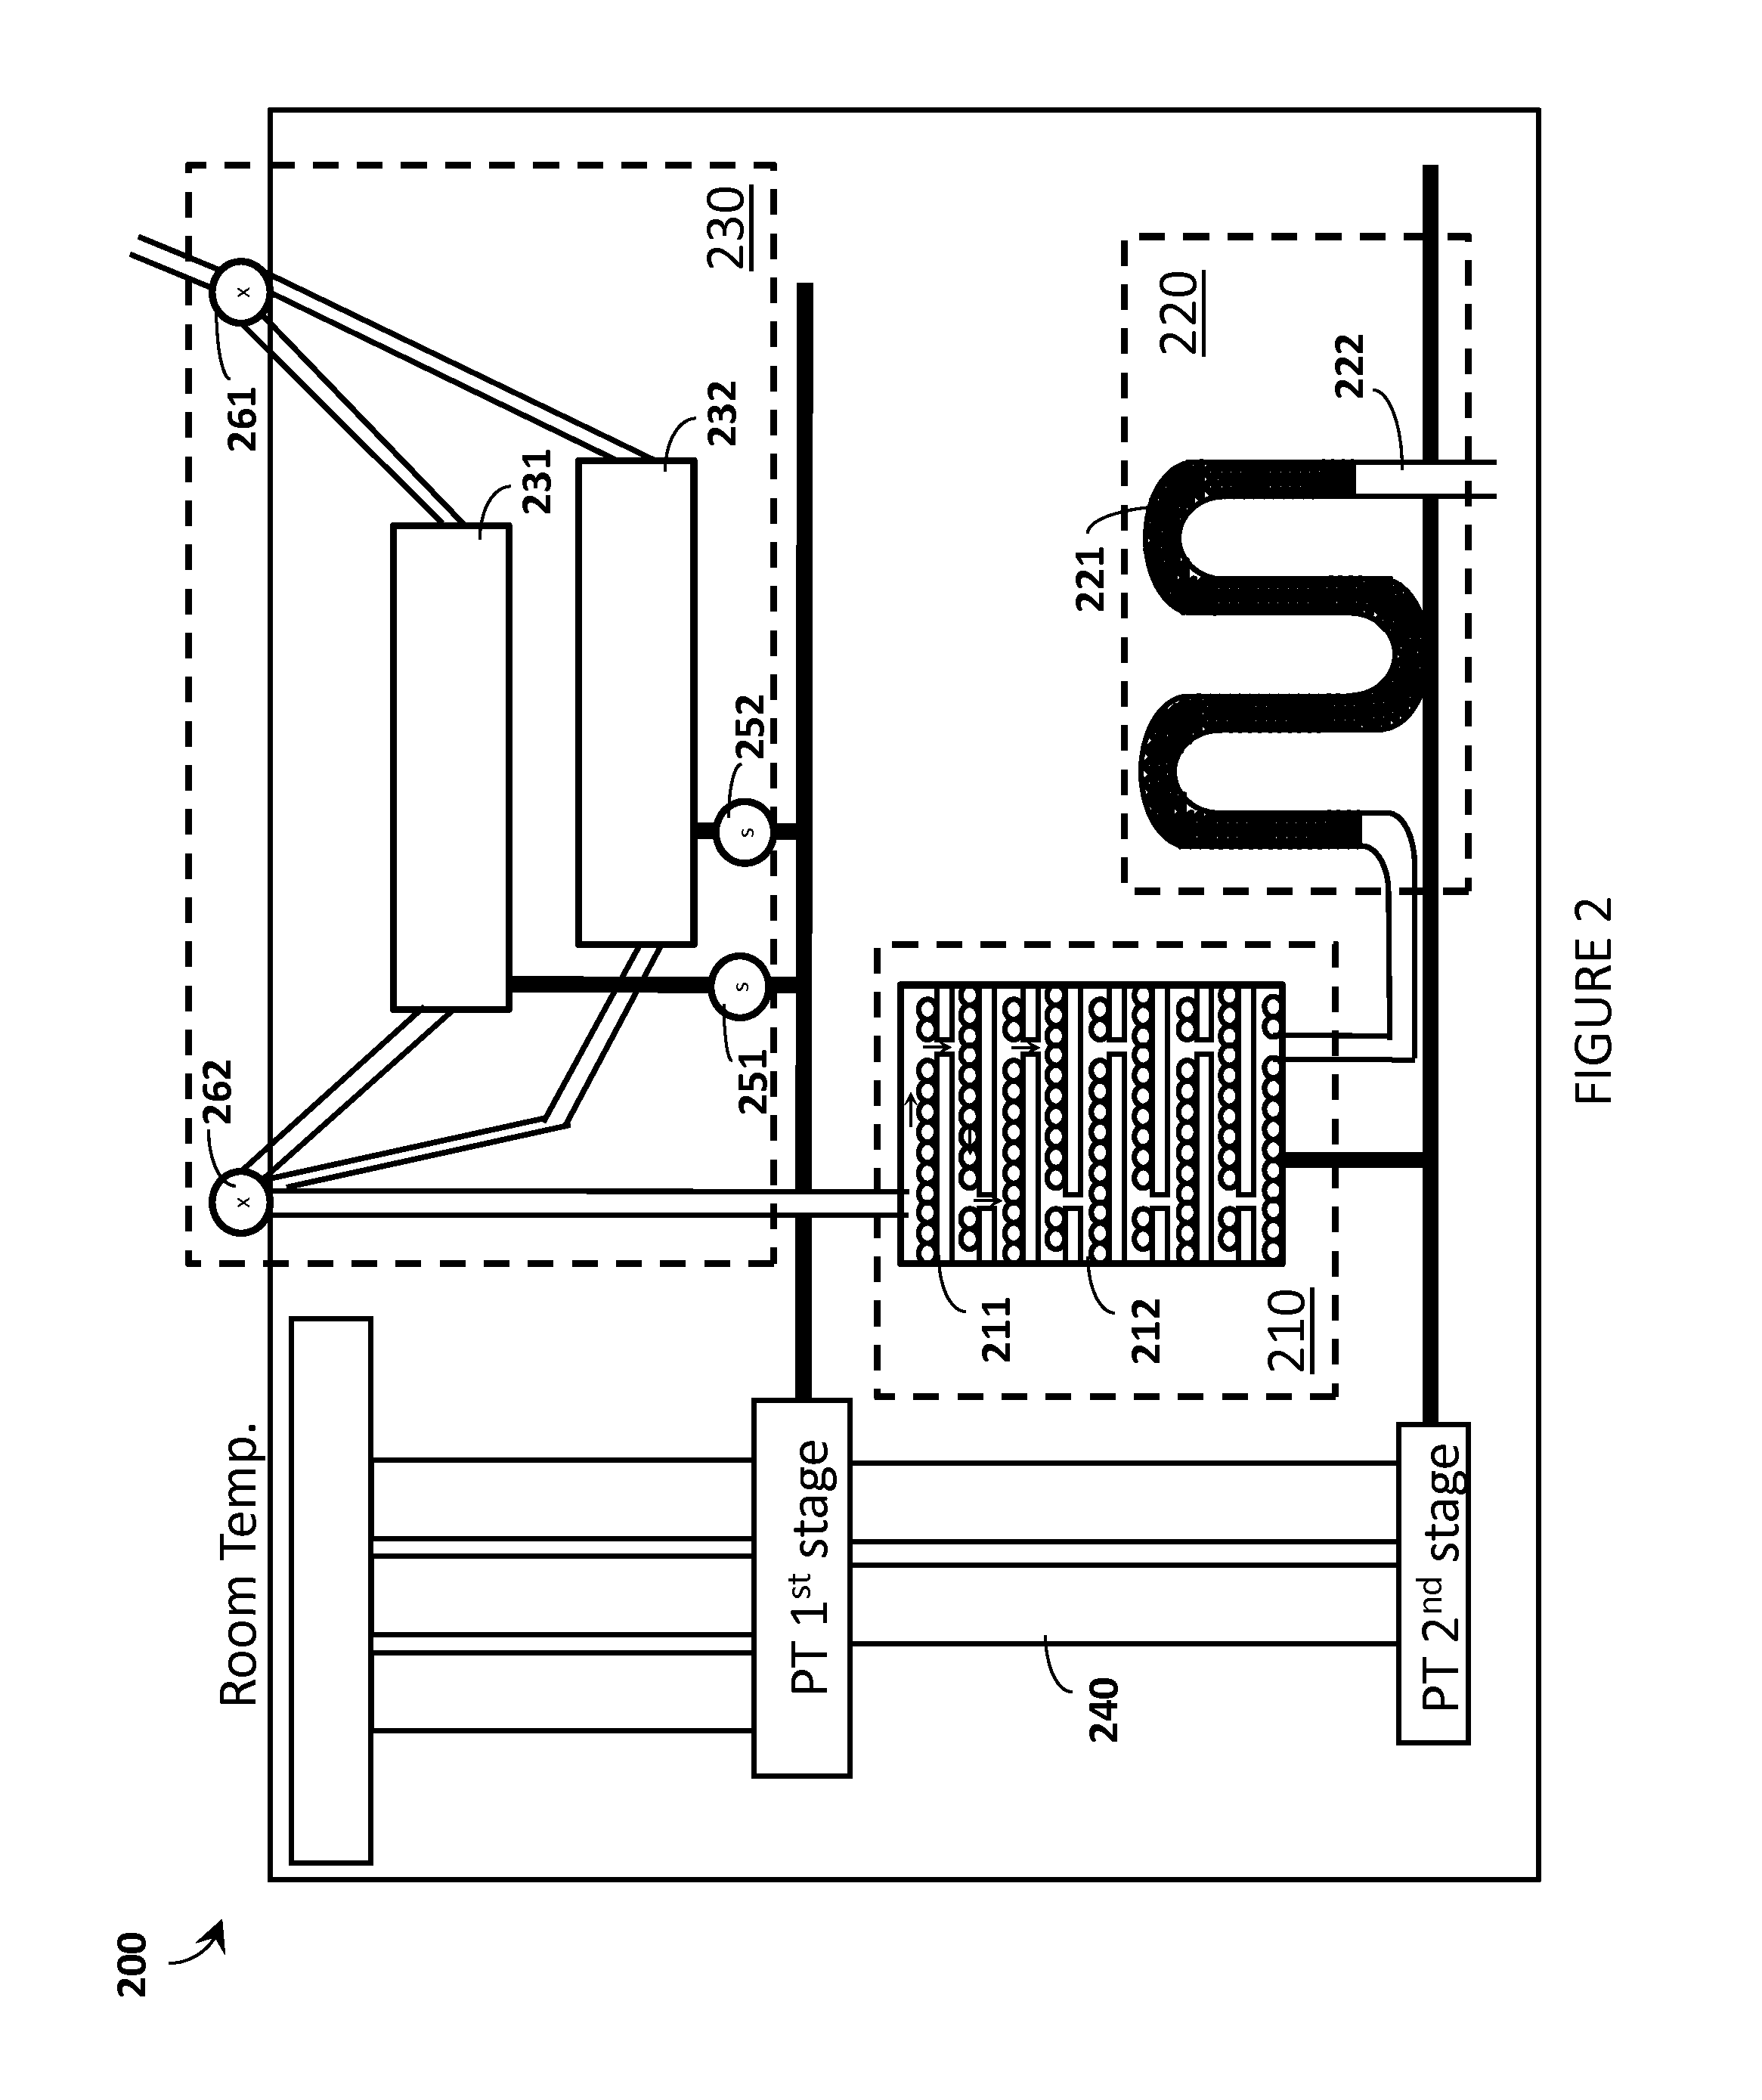 Systems and methods for cryogenic refrigeration